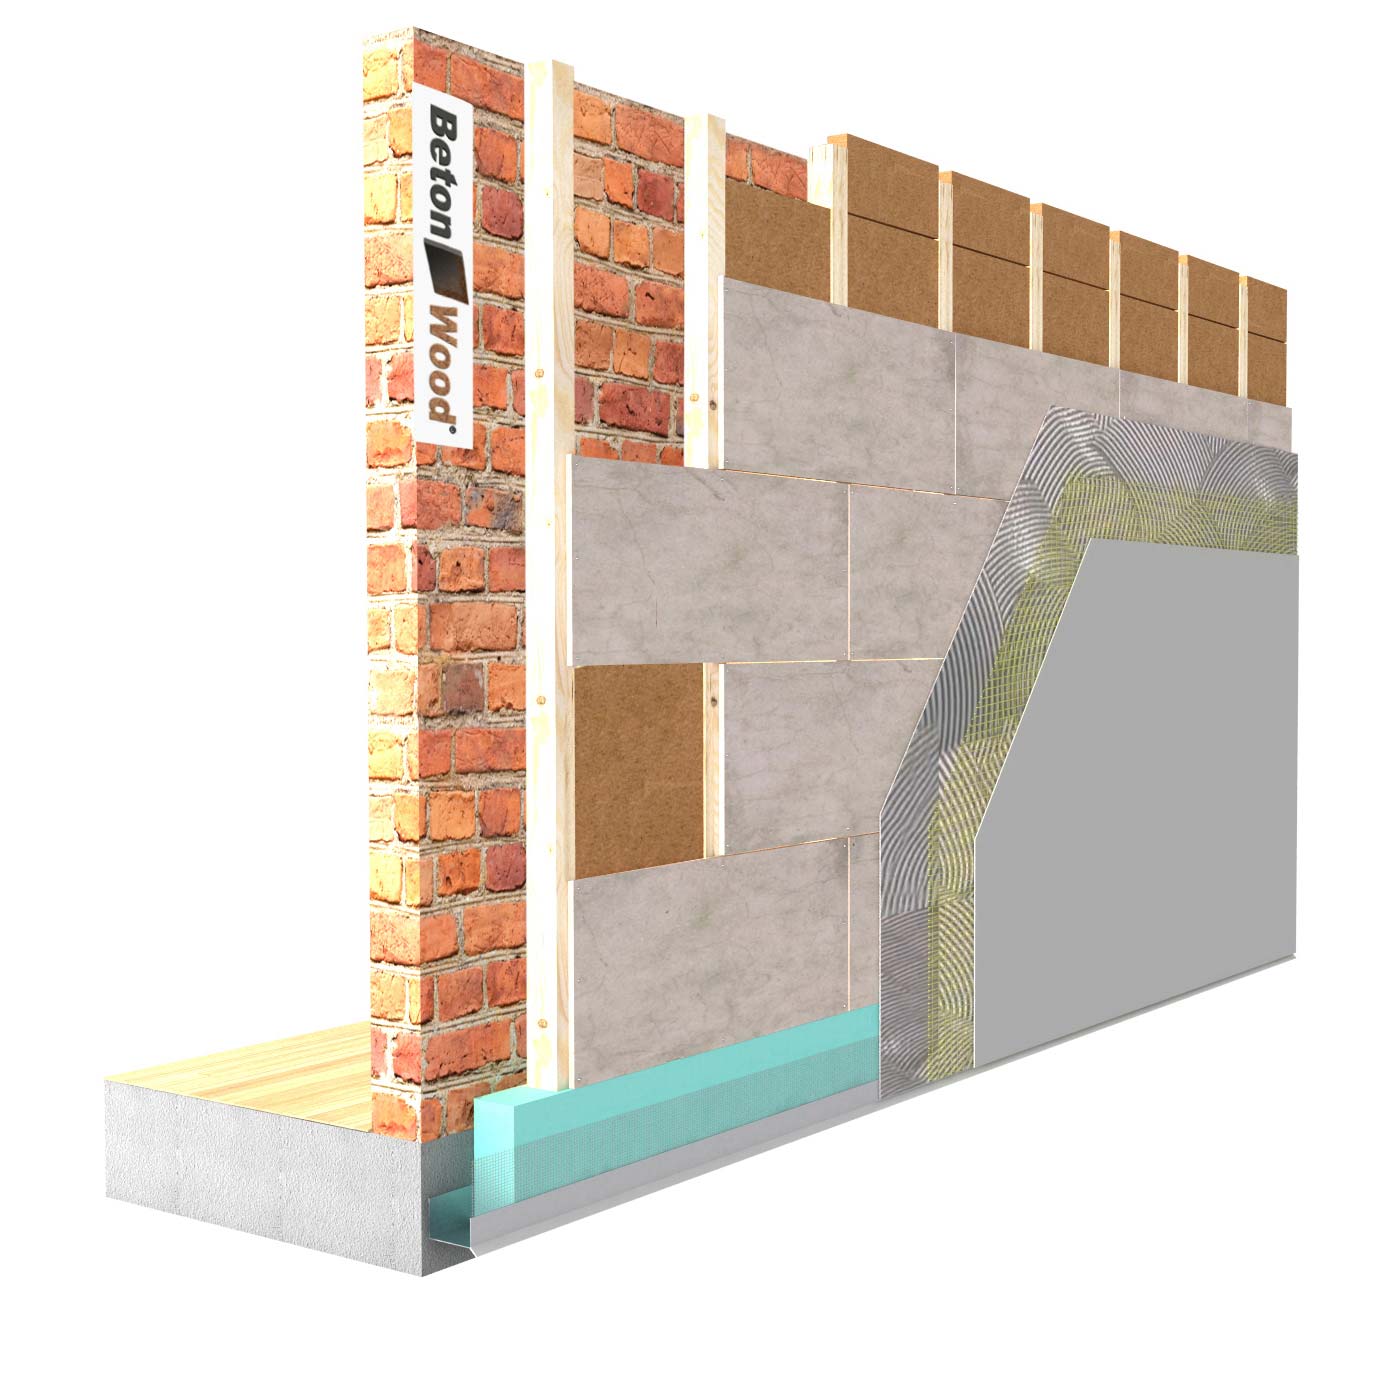 External insulation system with Protect dry wood fiber on masonry